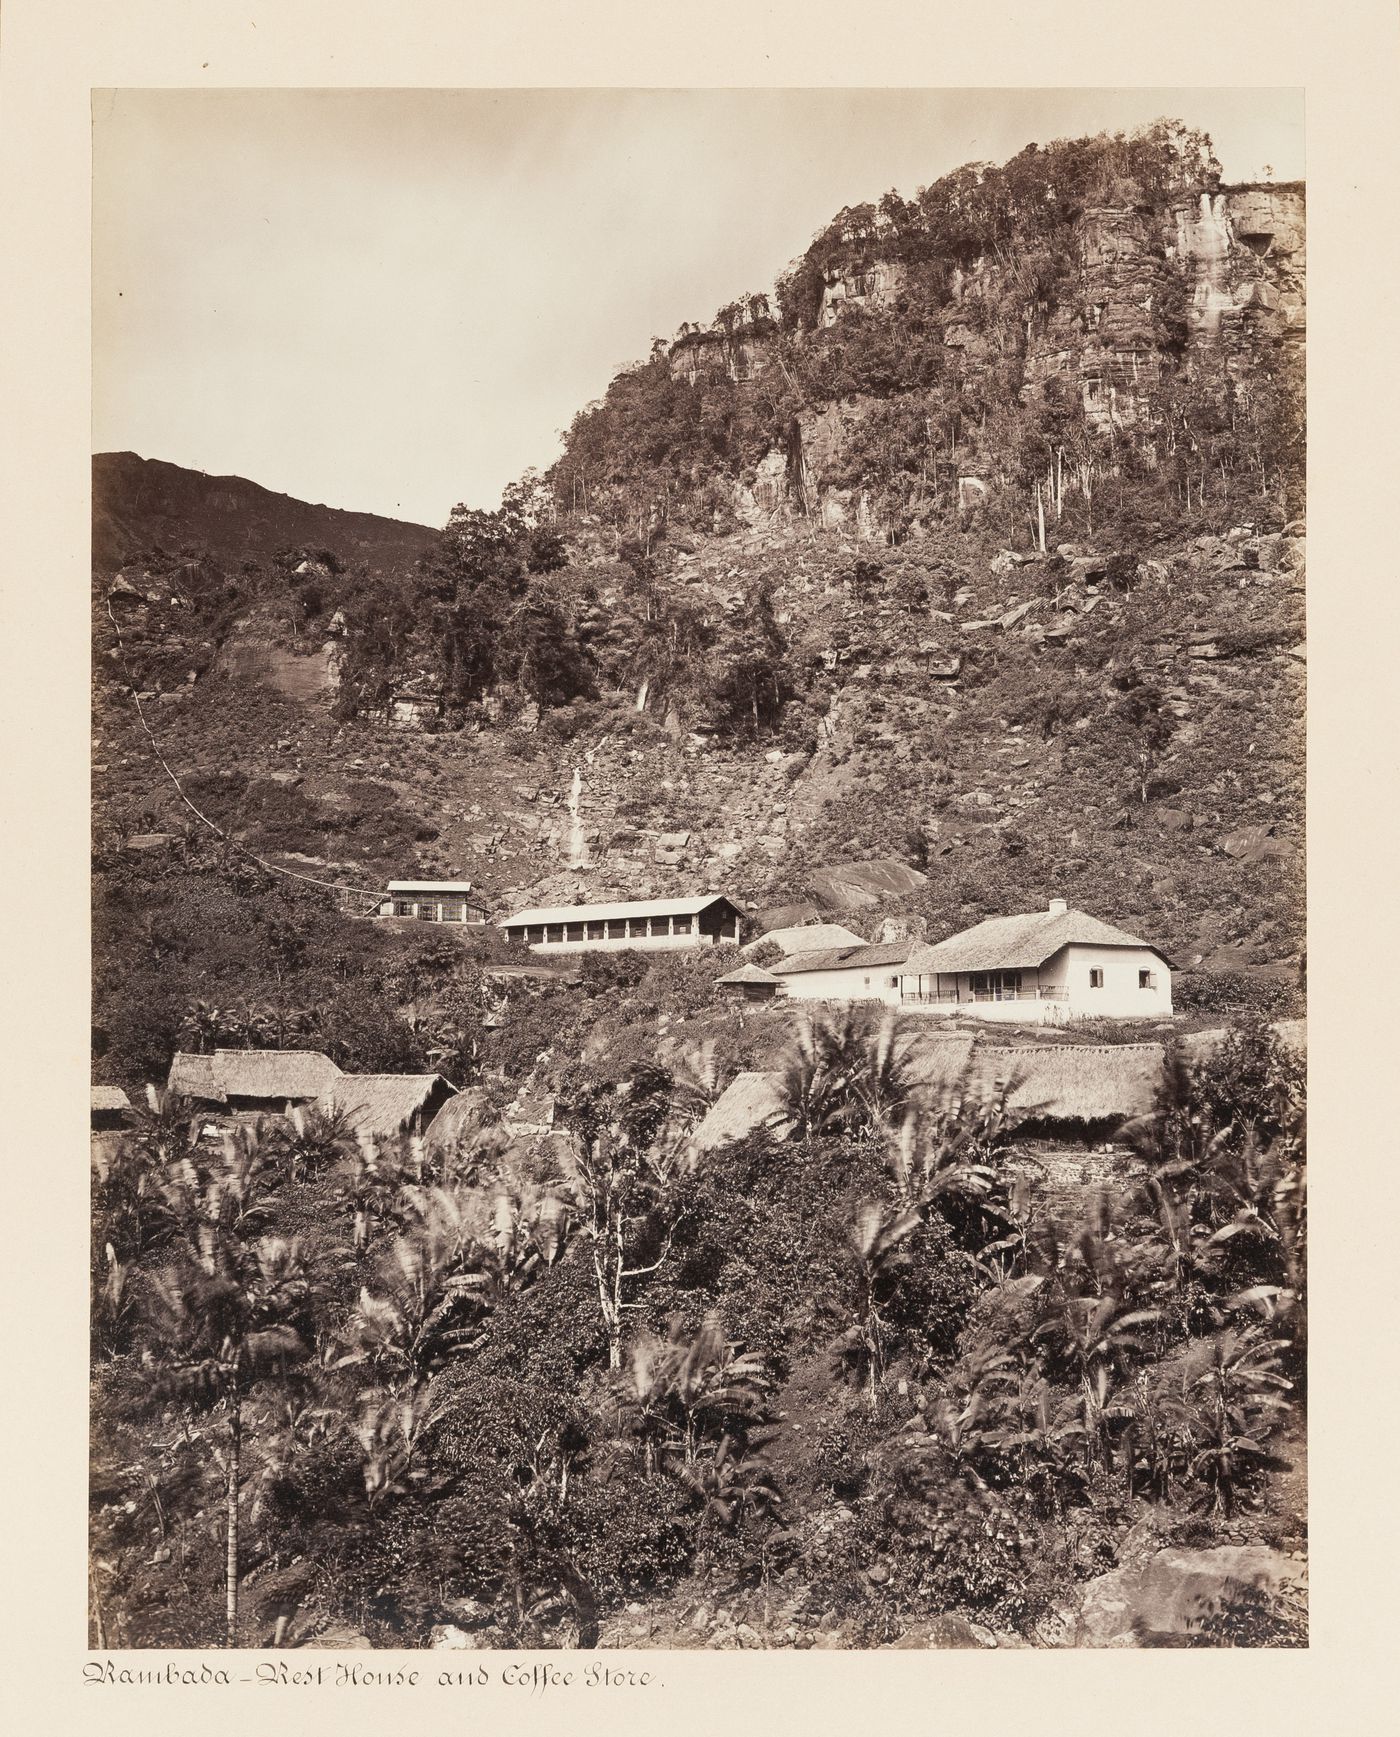 View of a rest house and coffee store on a mountain, Ramboda, Ceylon (now Sri Lanka)